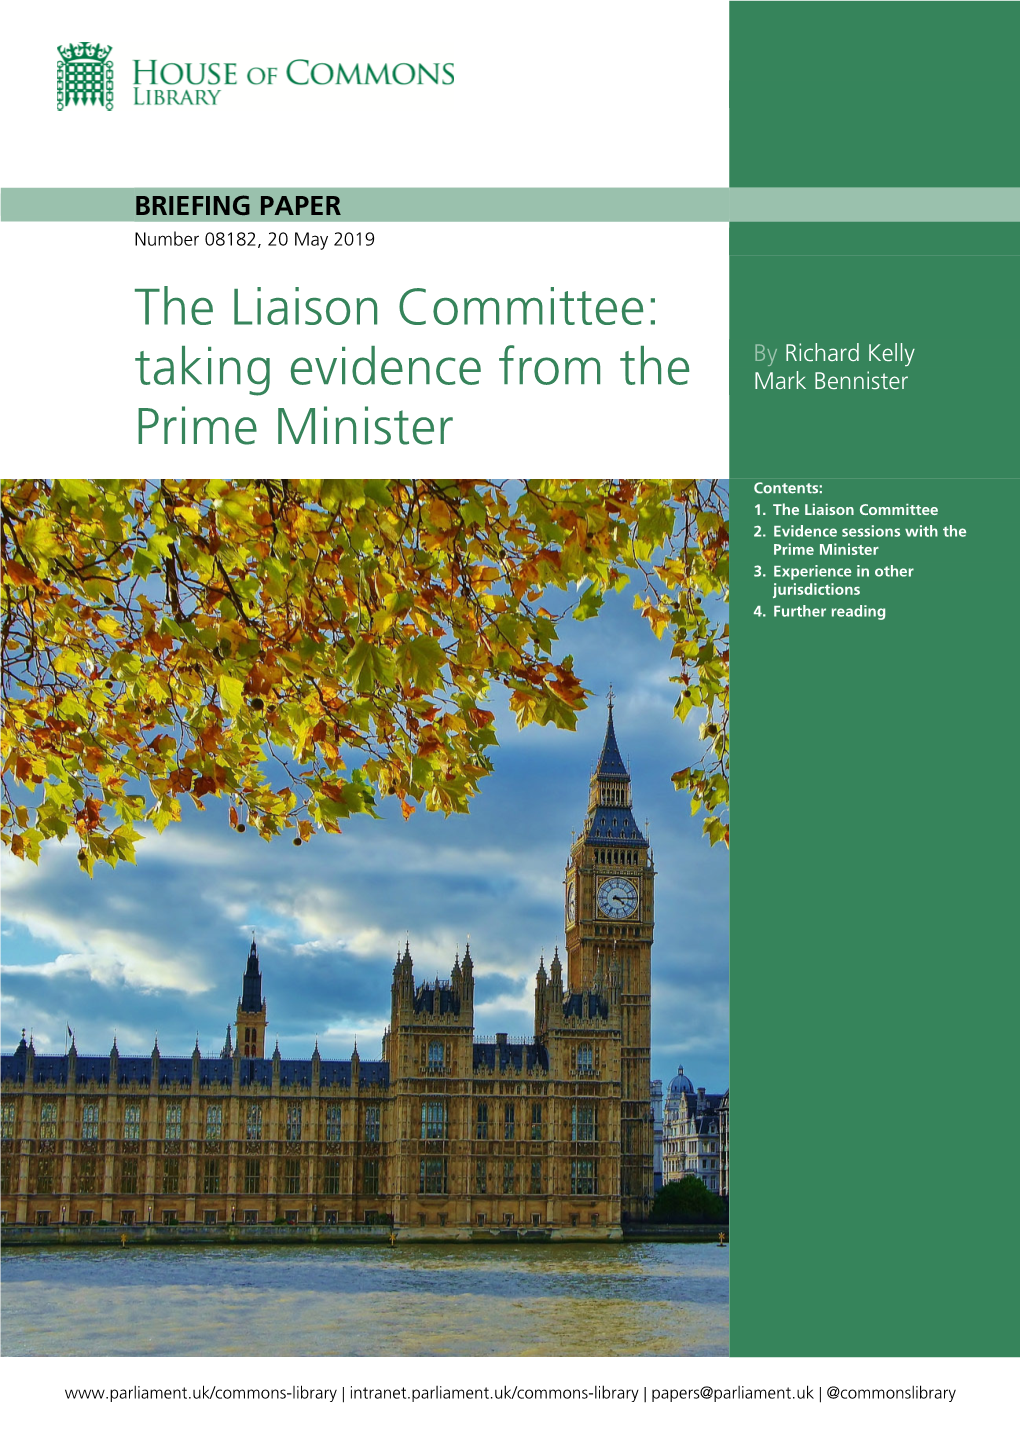 The Liaison Committee: Taking Evidence from the Prime Minister